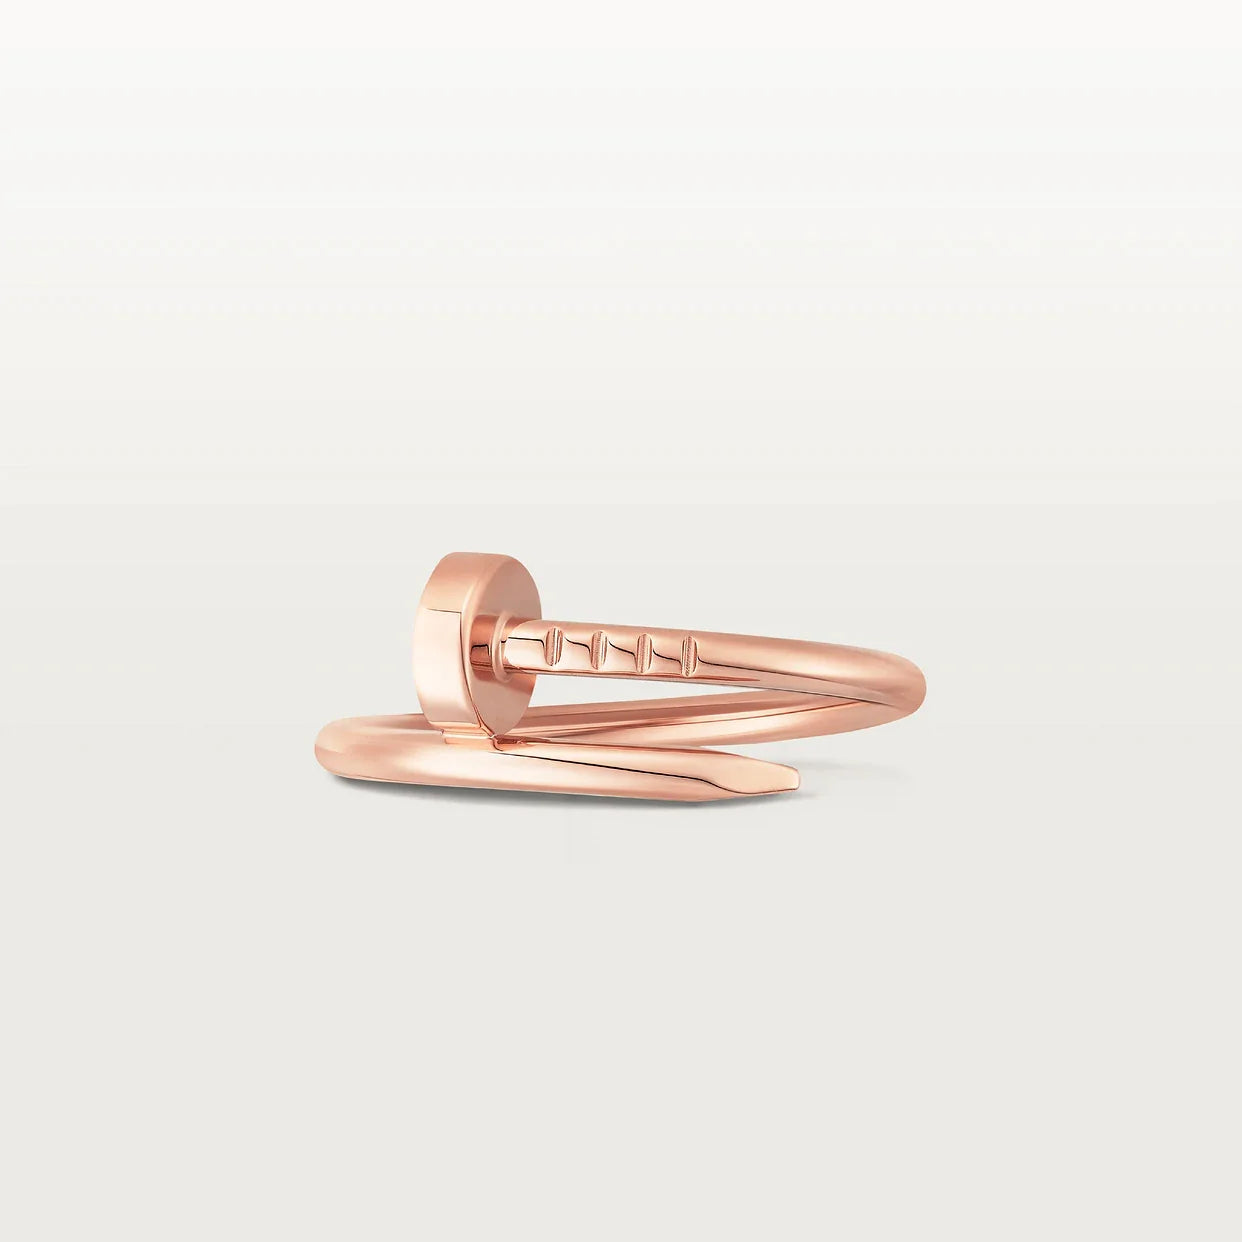 JUSTE RING 1.8MM